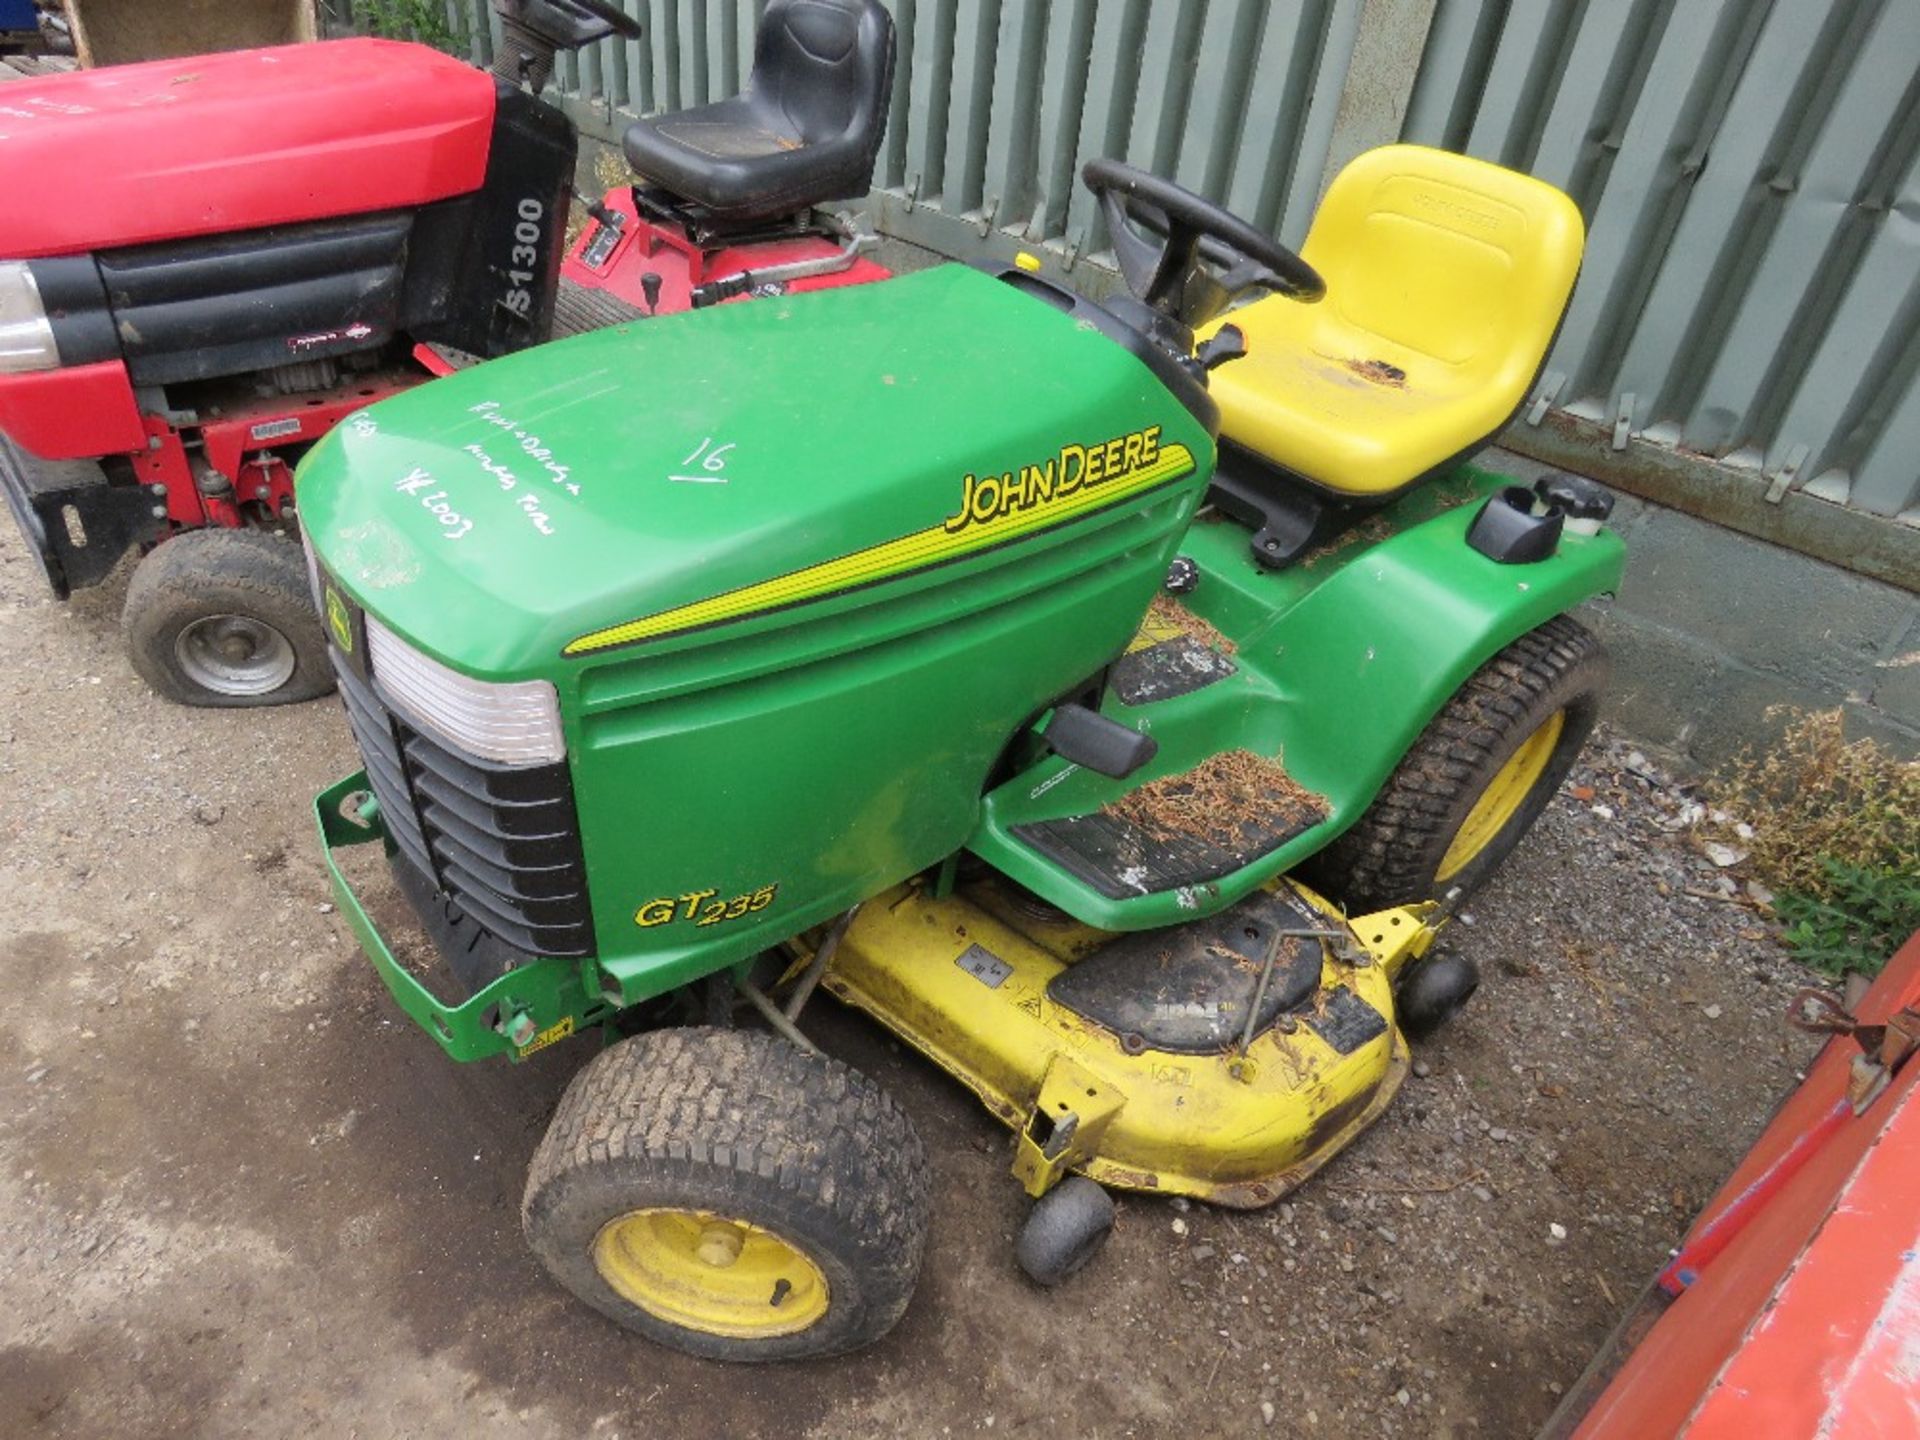 JOHN DEERE GT235 RIDE ON MOWER YR2003 when tested was seen to start, run and drive